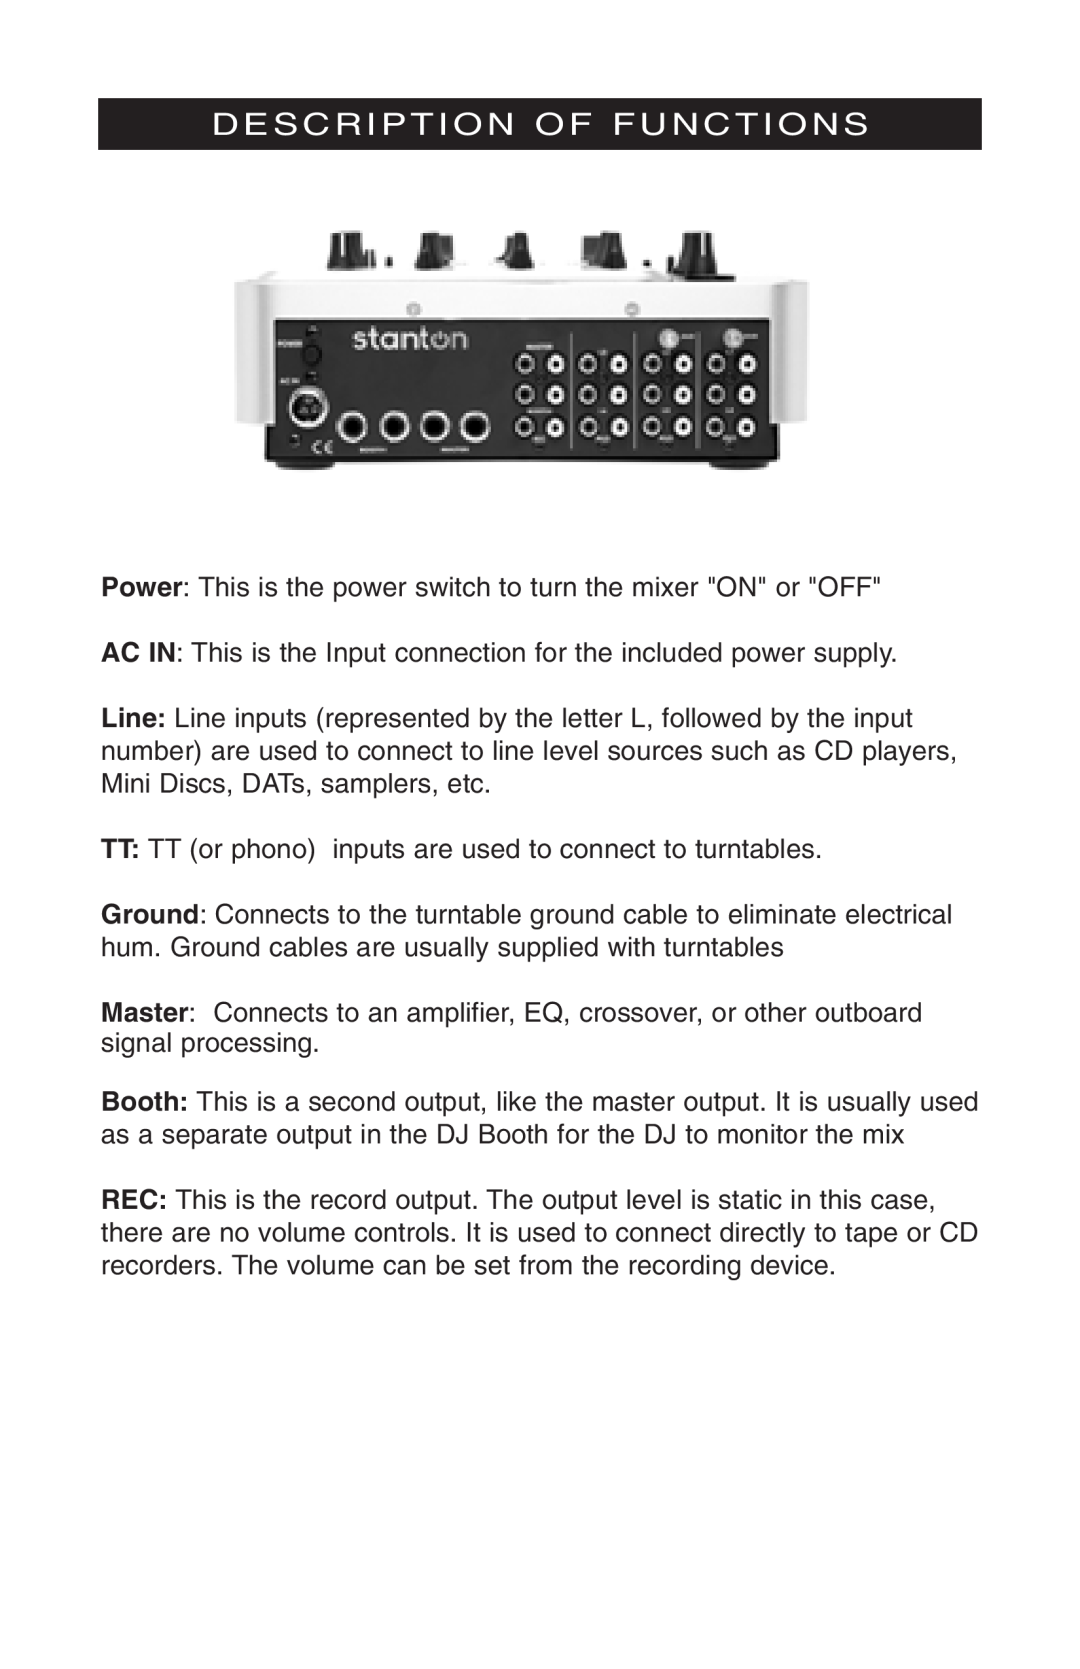 Stanton M.303 owner manual Description Of Functions, Power This is the power switch to turn the mixer ON or OFF 